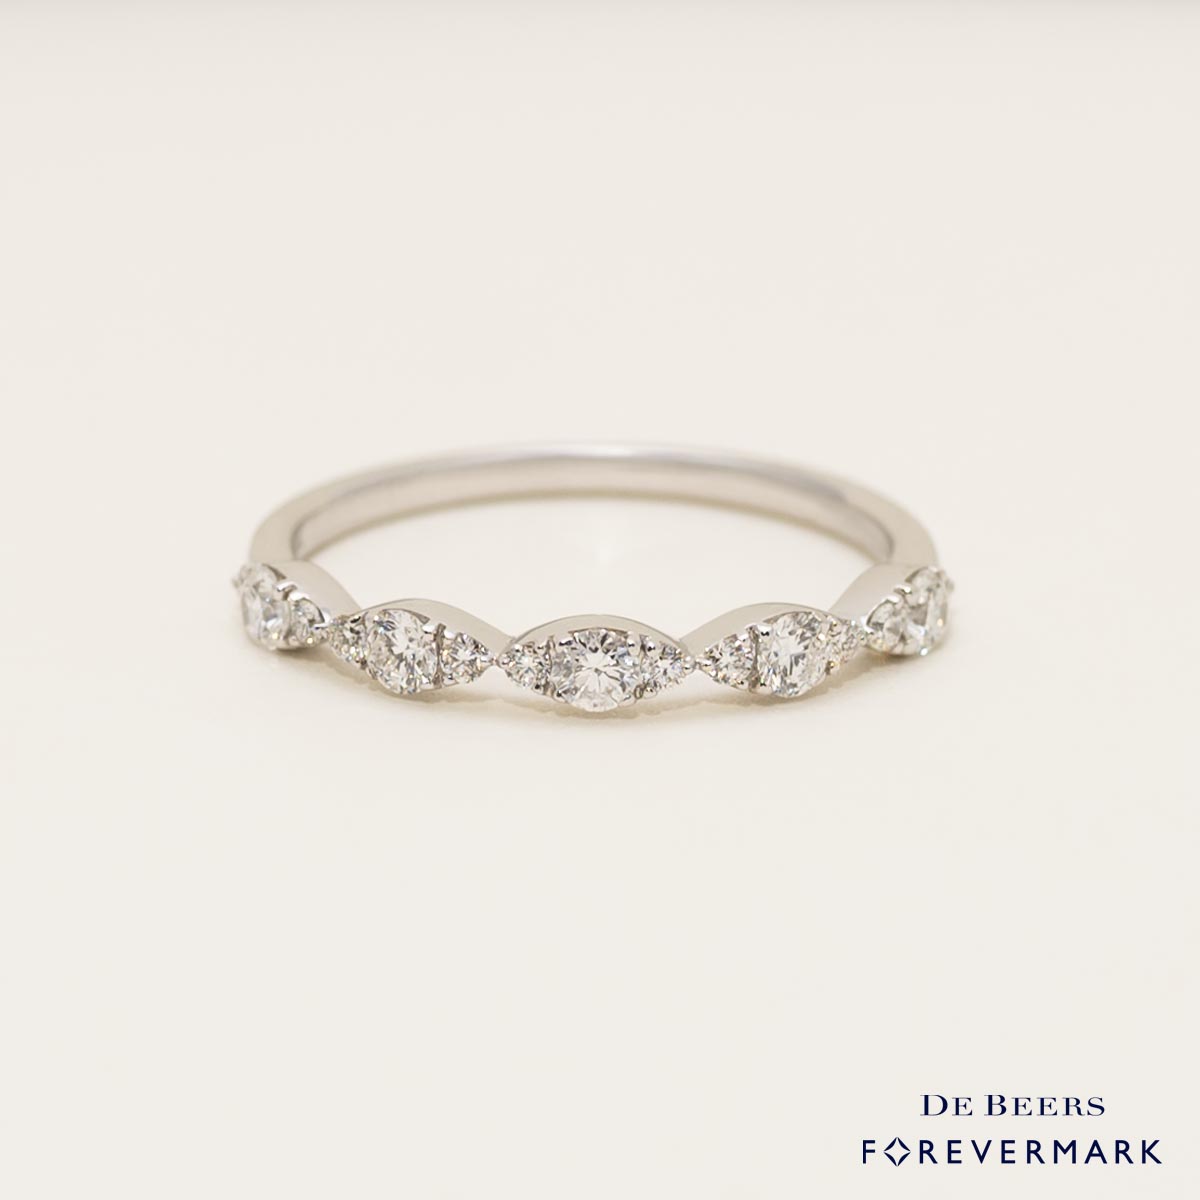 De Beers Forevermark Petite Micro Pave Diamond Band in 18kt White Gold (1/3ct tw)